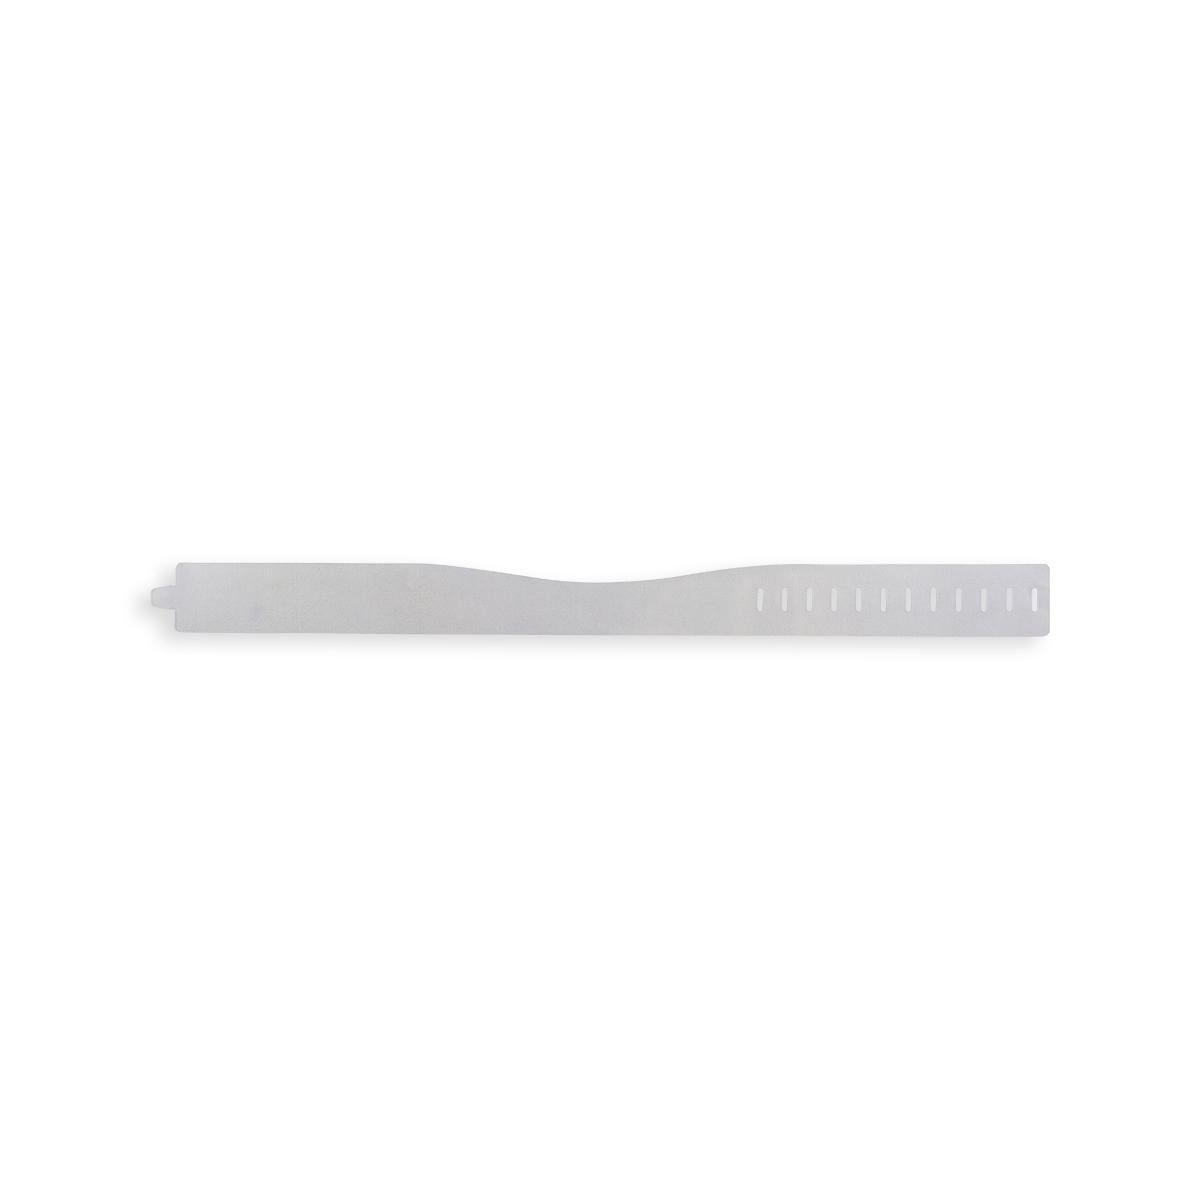 Product Large Adjustable Plastic Full Length Collar Supports - 500/Pack - Cleaner's Supply image